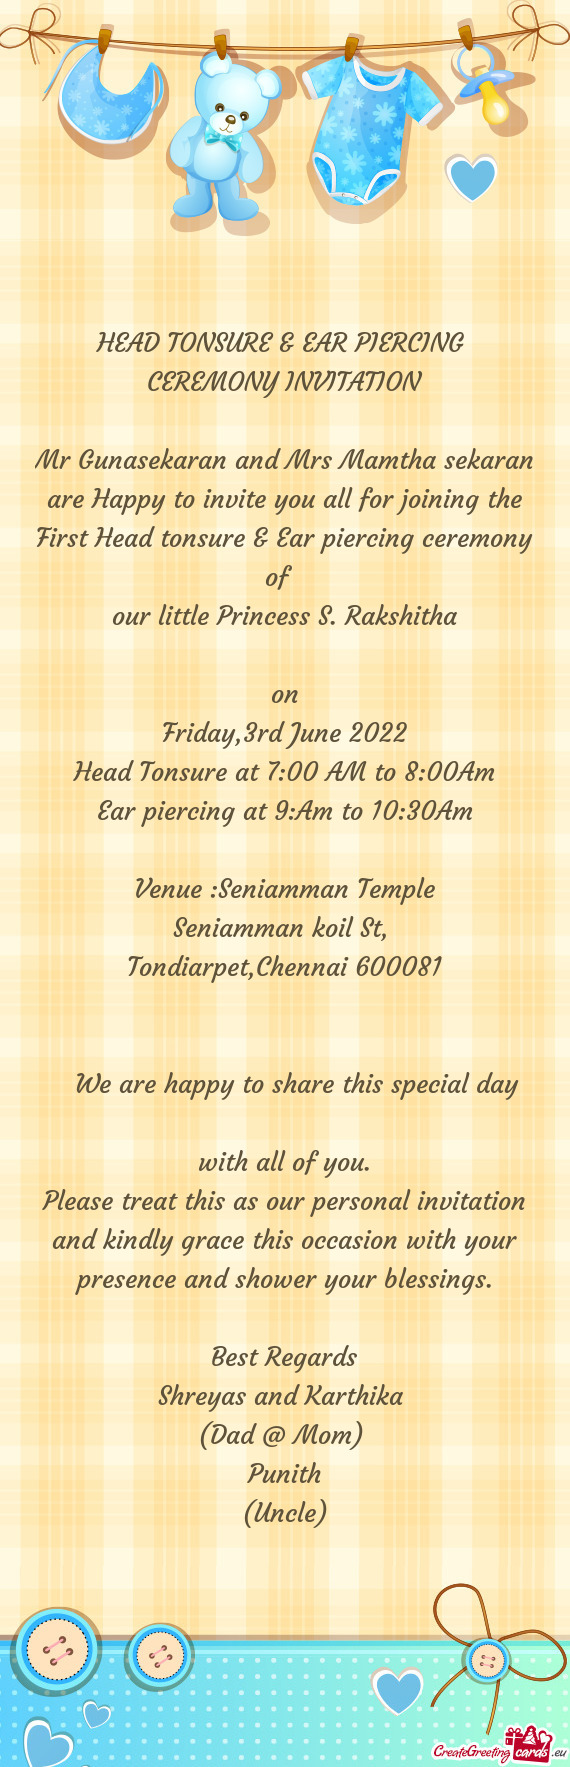 Mr Gunasekaran and Mrs Mamtha sekaran are Happy to invite you all for joining the First Head tonsure